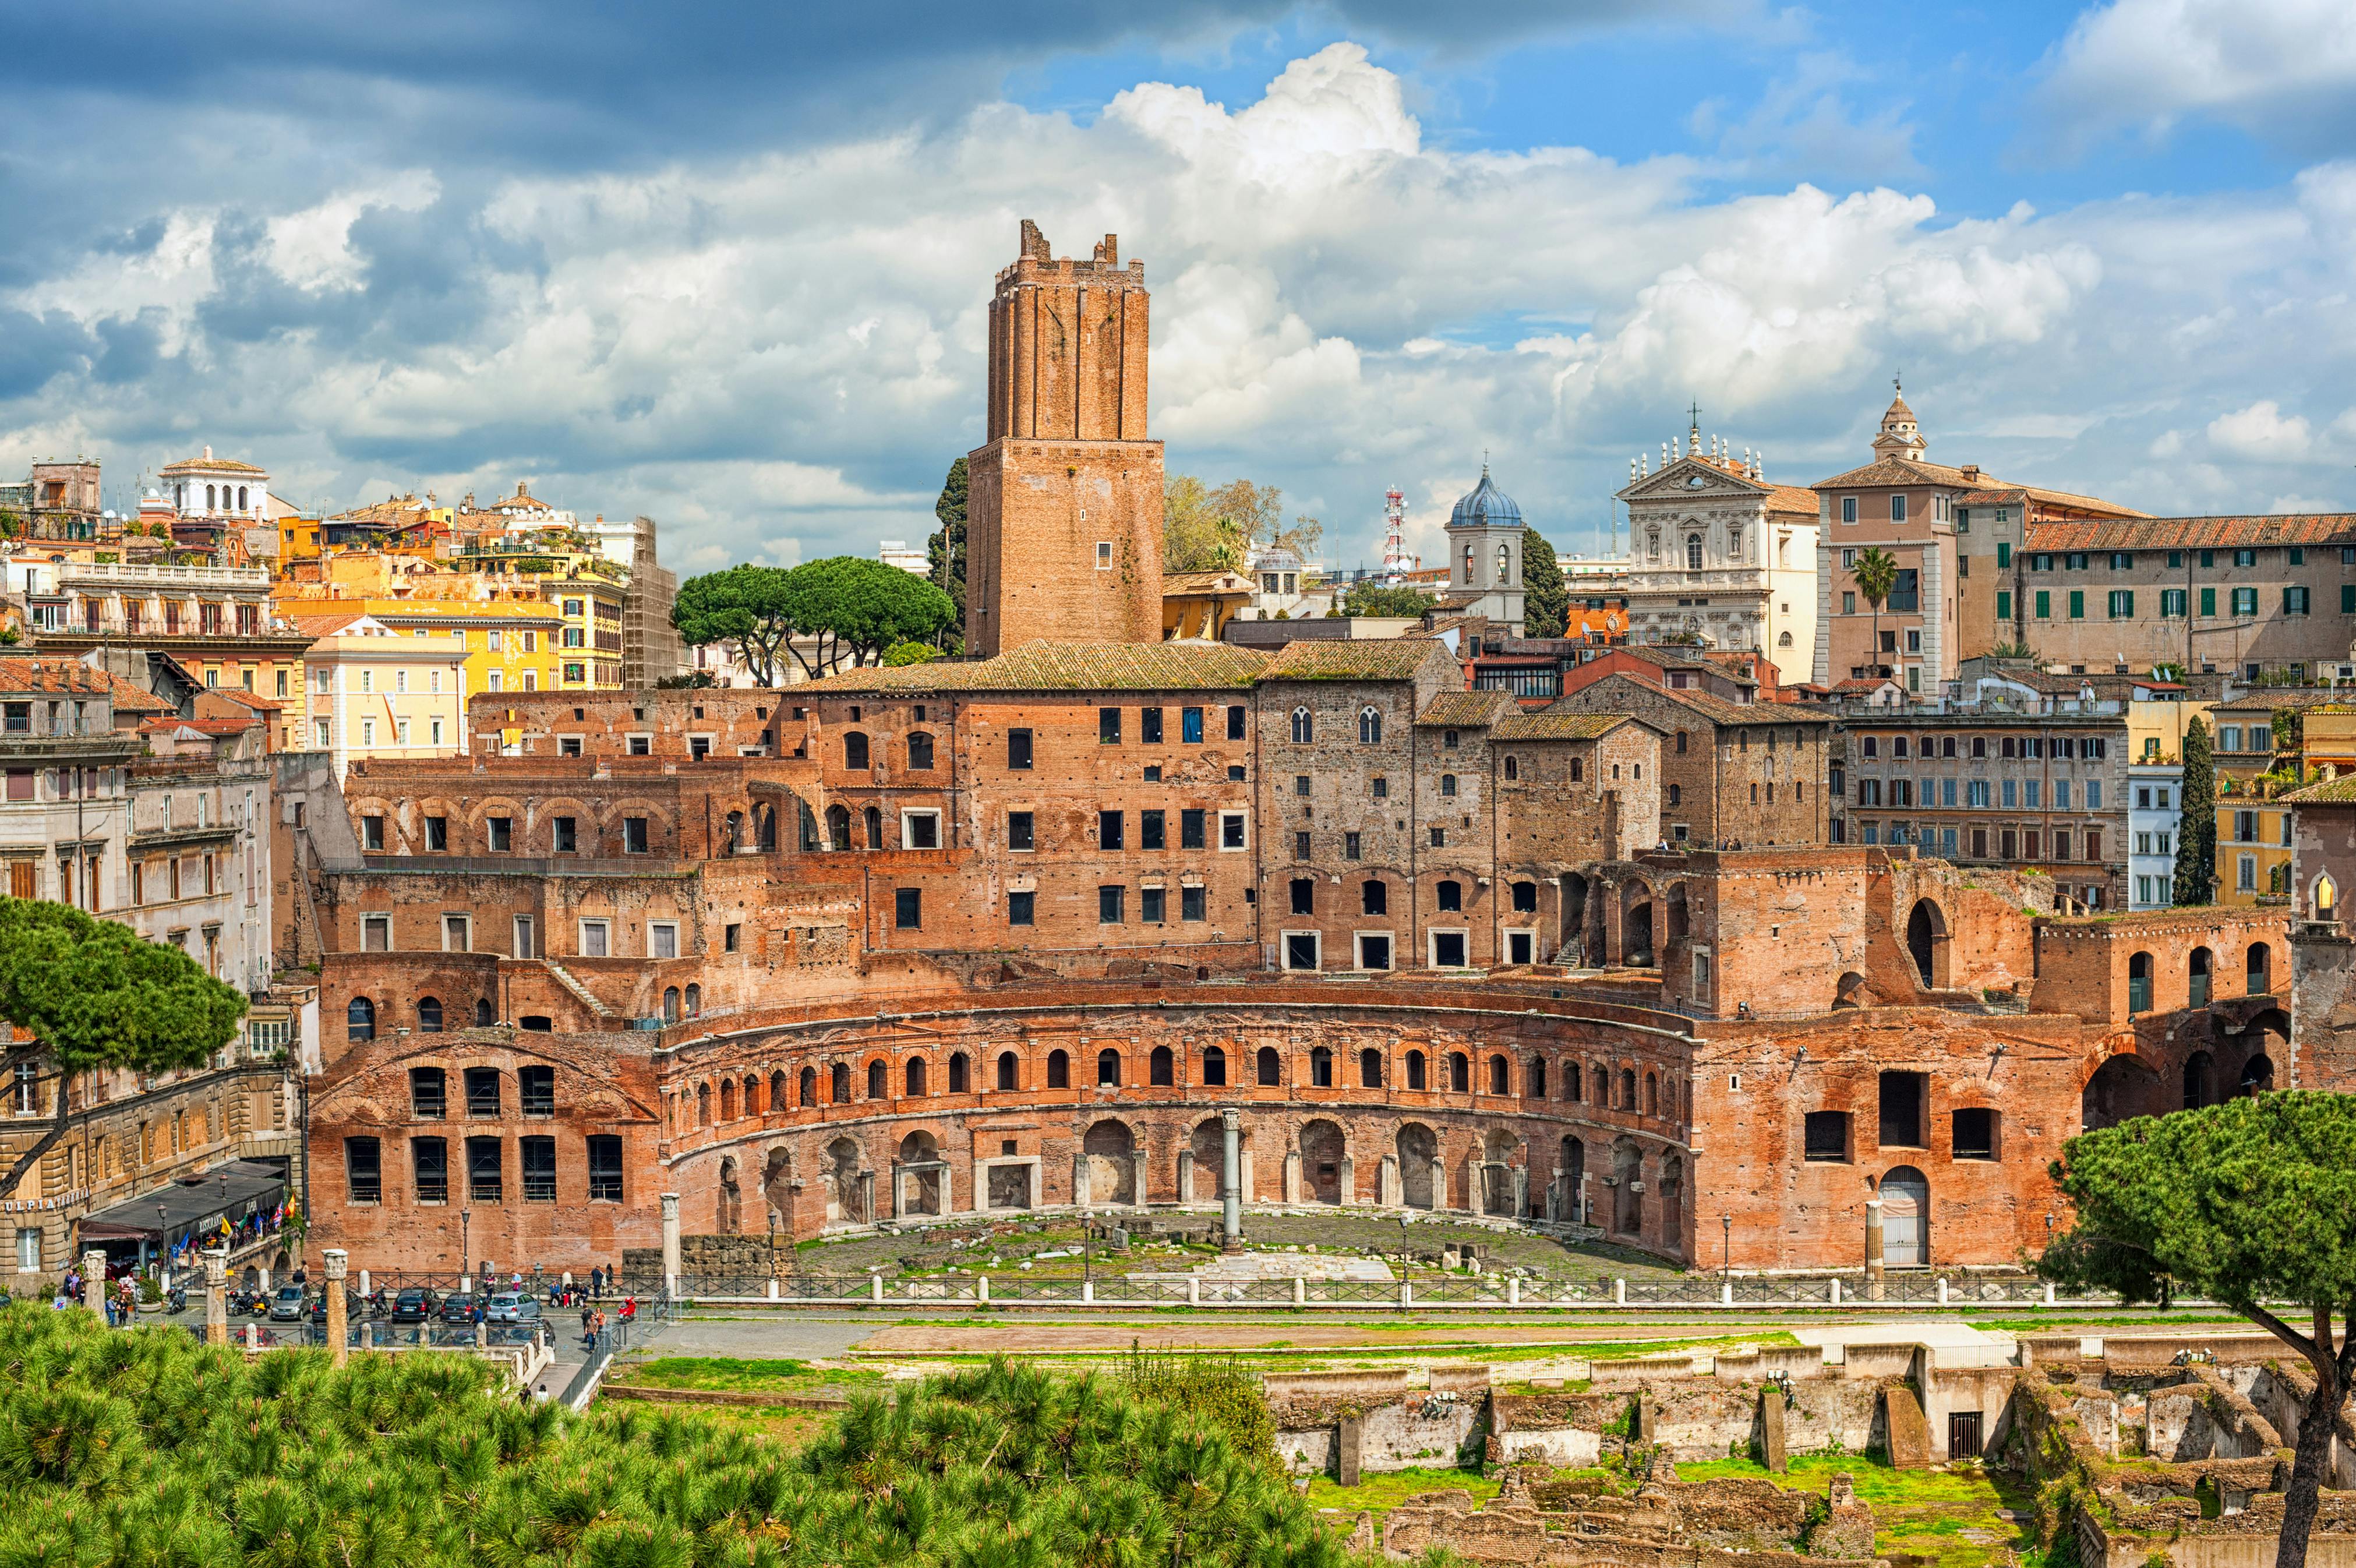 Entrance tickets to Trajan's Markets and the Fori Imperiali Museum